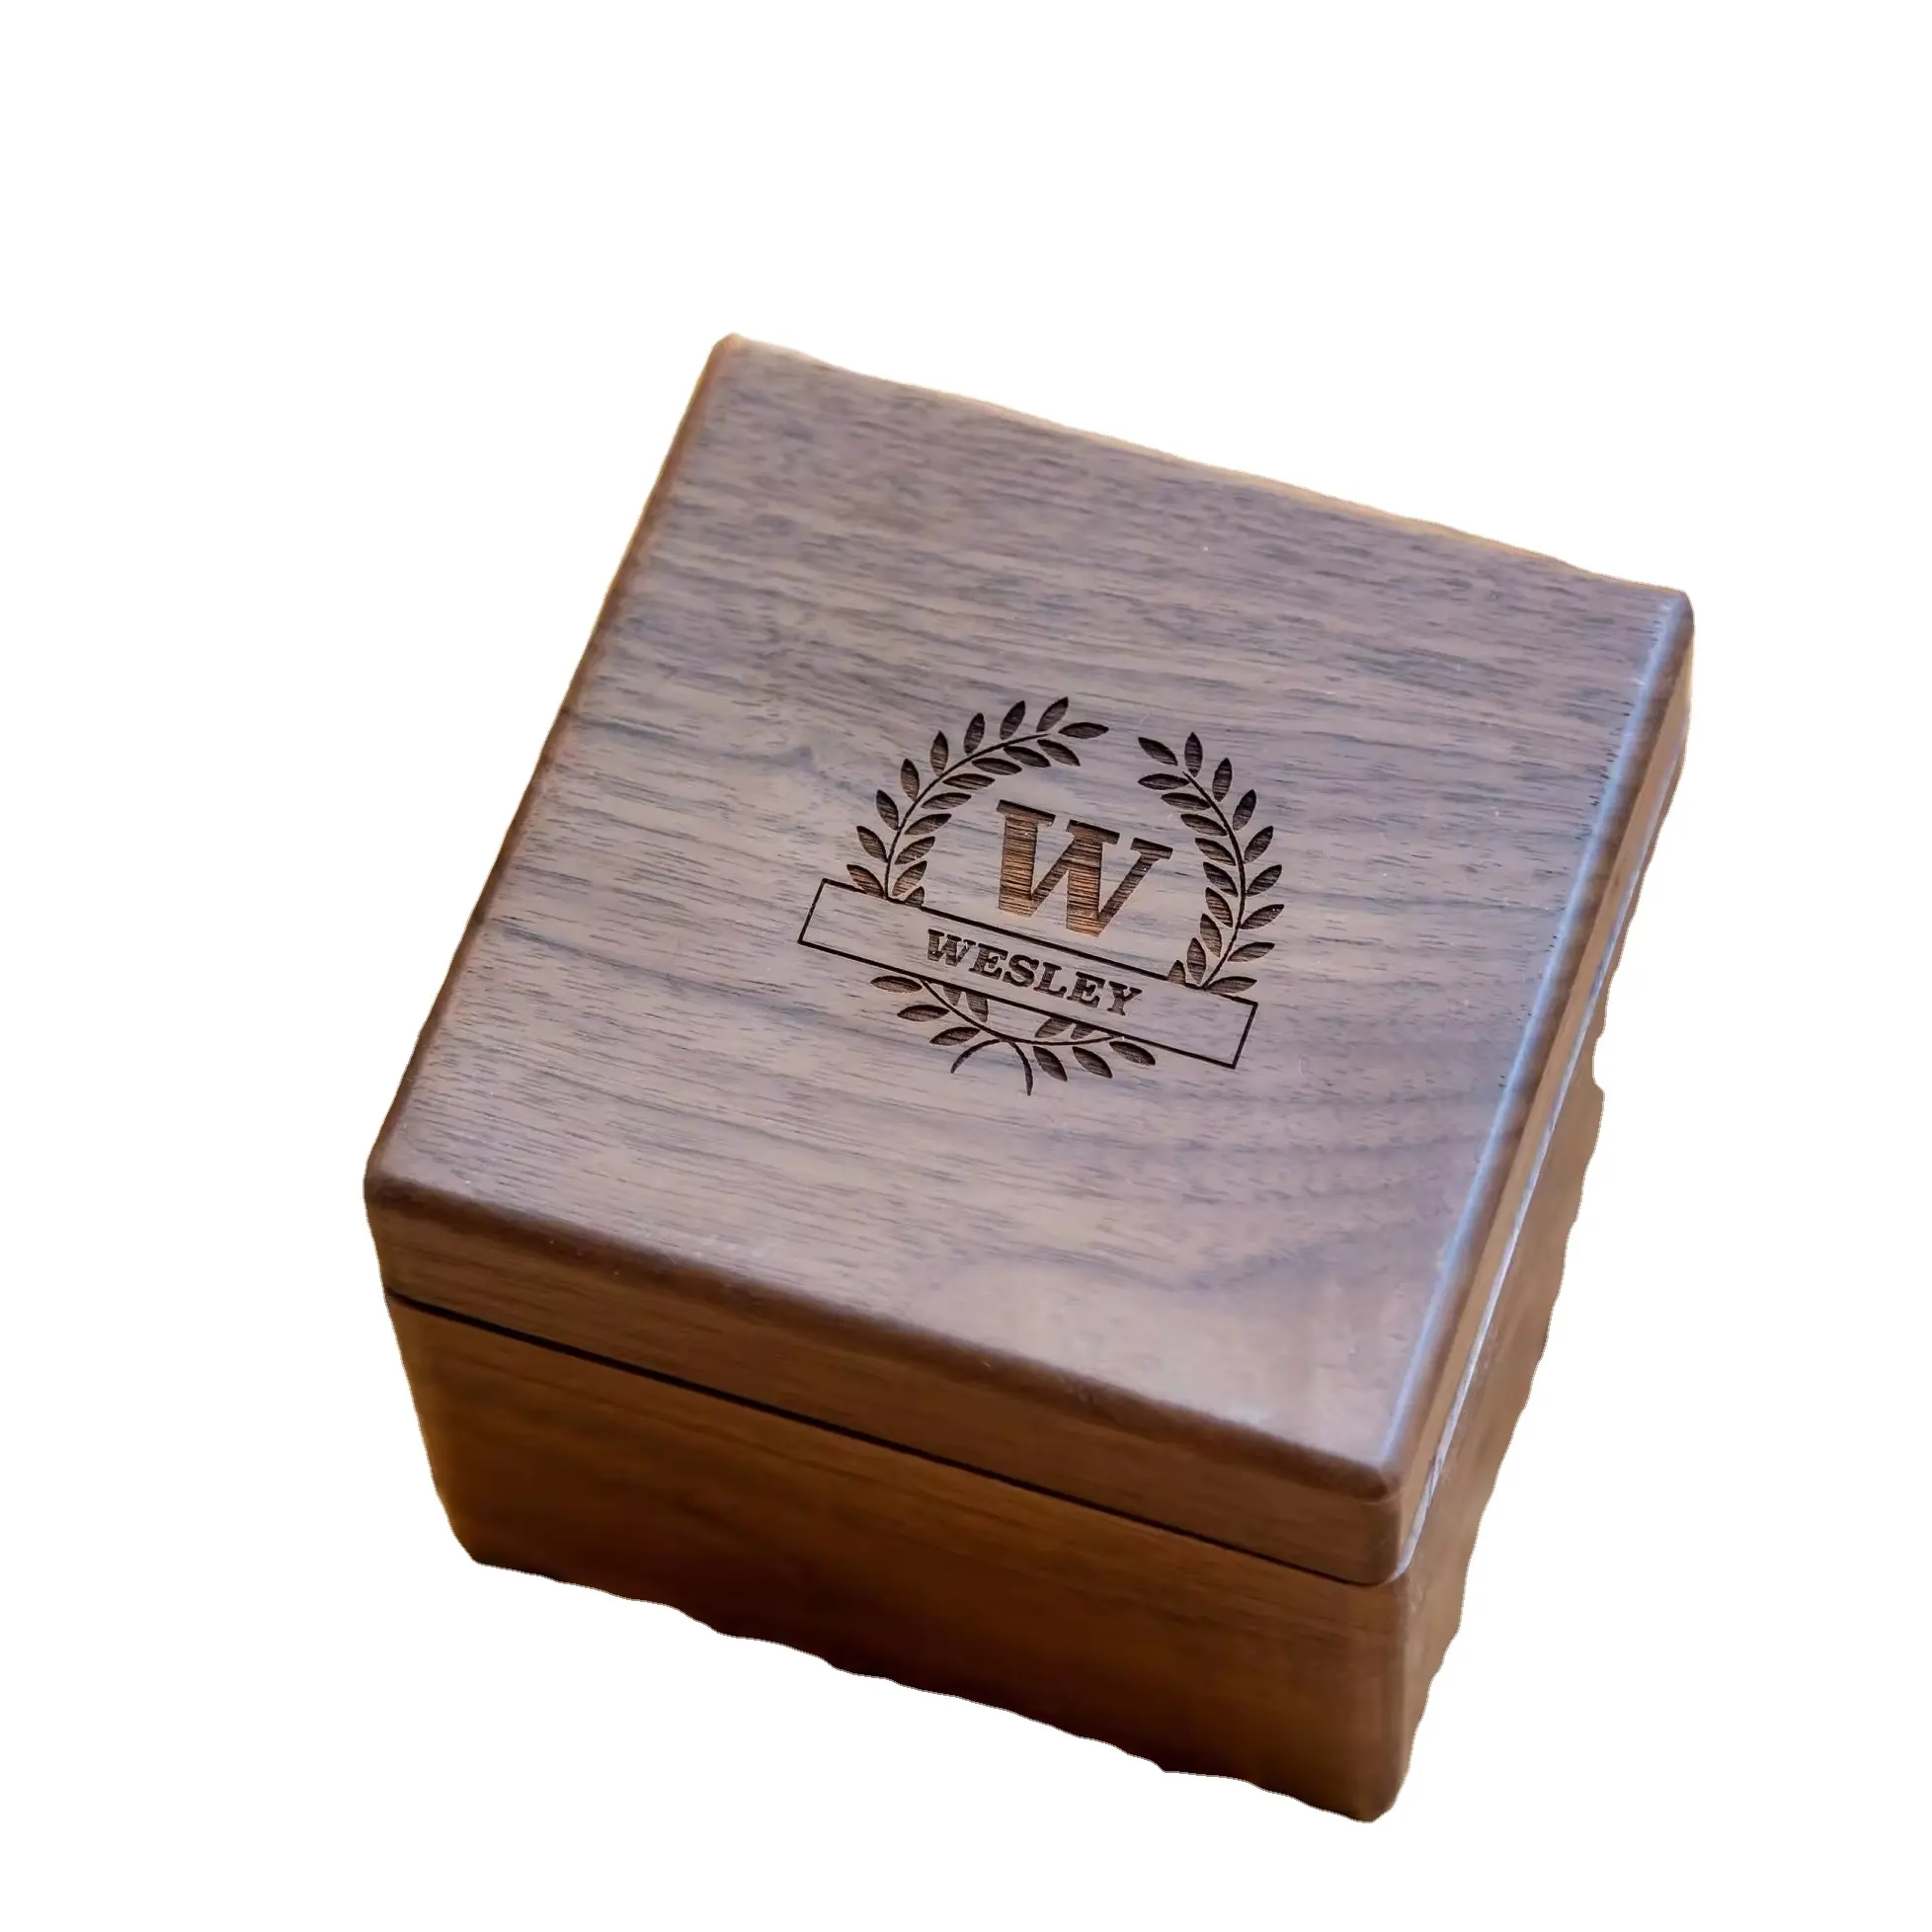 Square Walnut Wooden Craft Watch Gift Box Accessory Only-Dad Husband or Father's Day Gift Idea